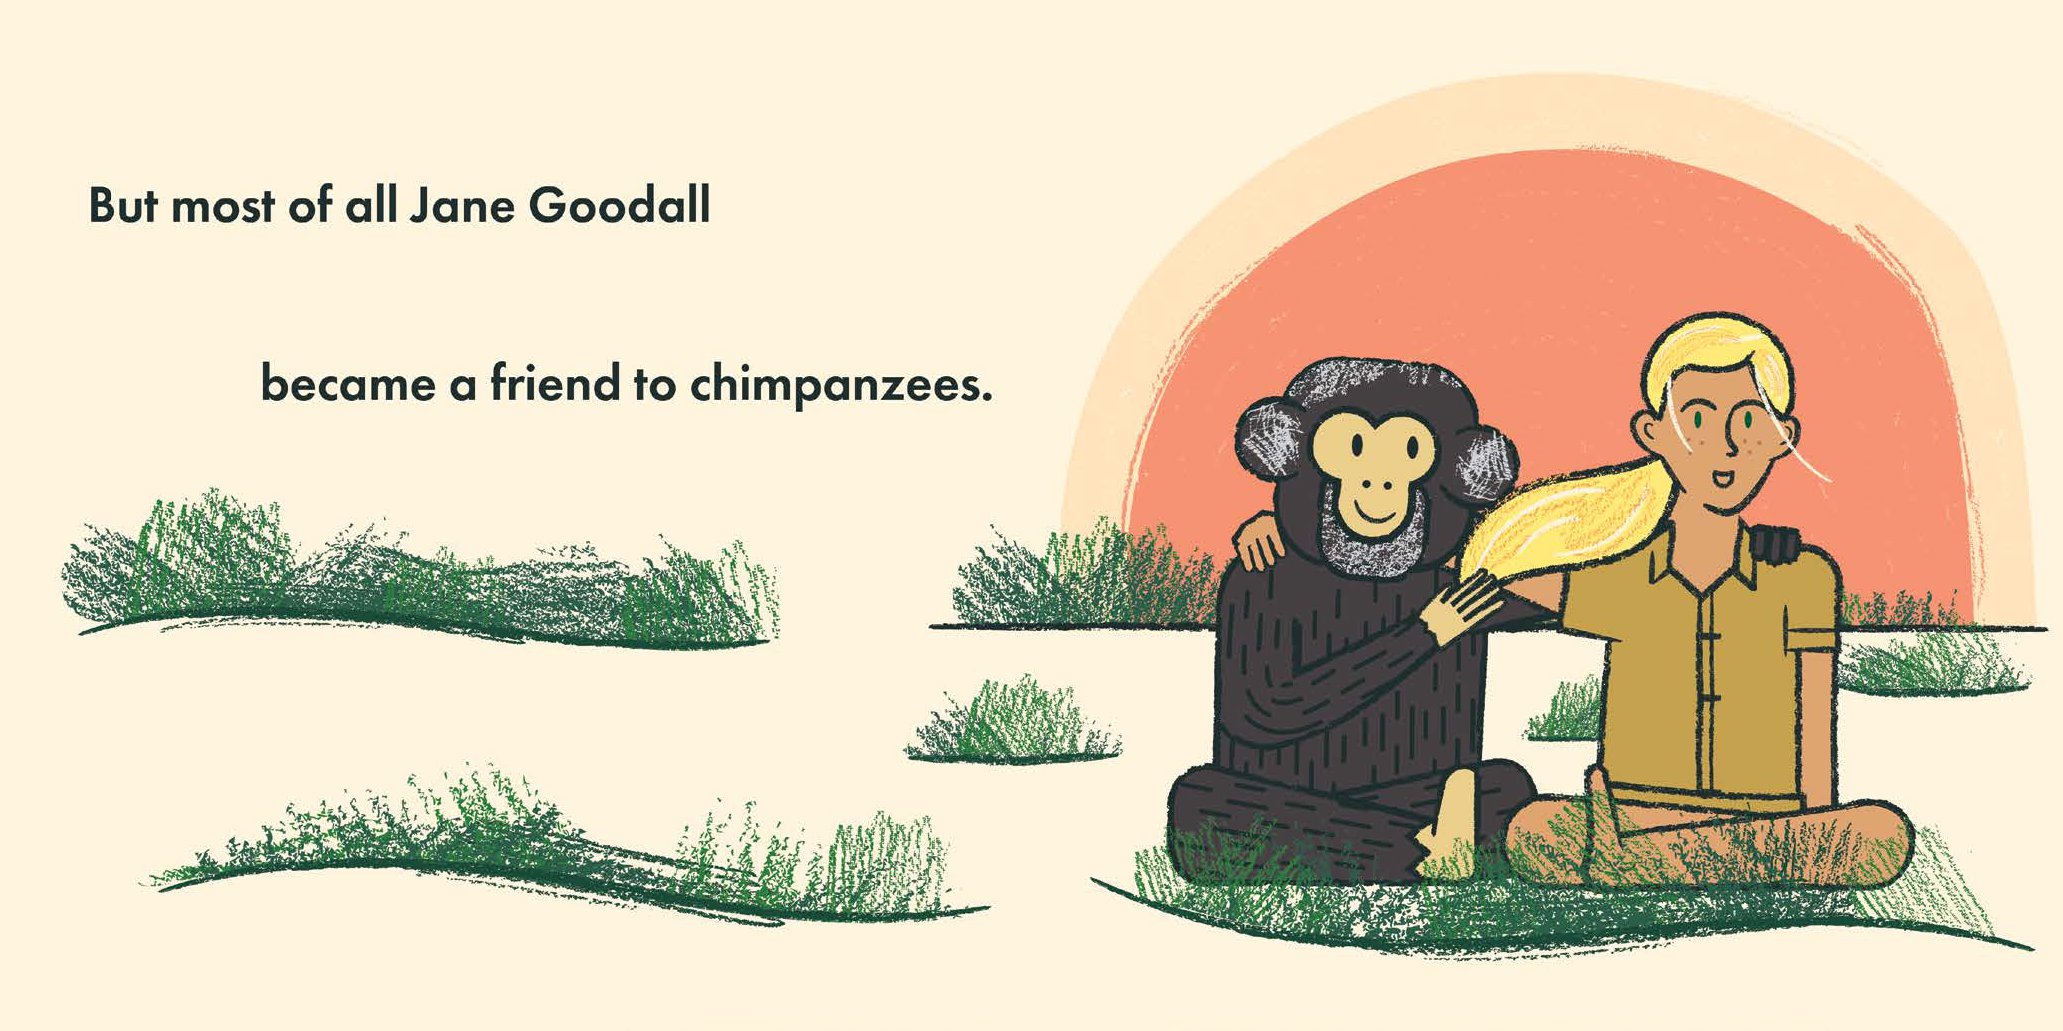 Little Naturalists: Jane Goodall Is a Friend to All